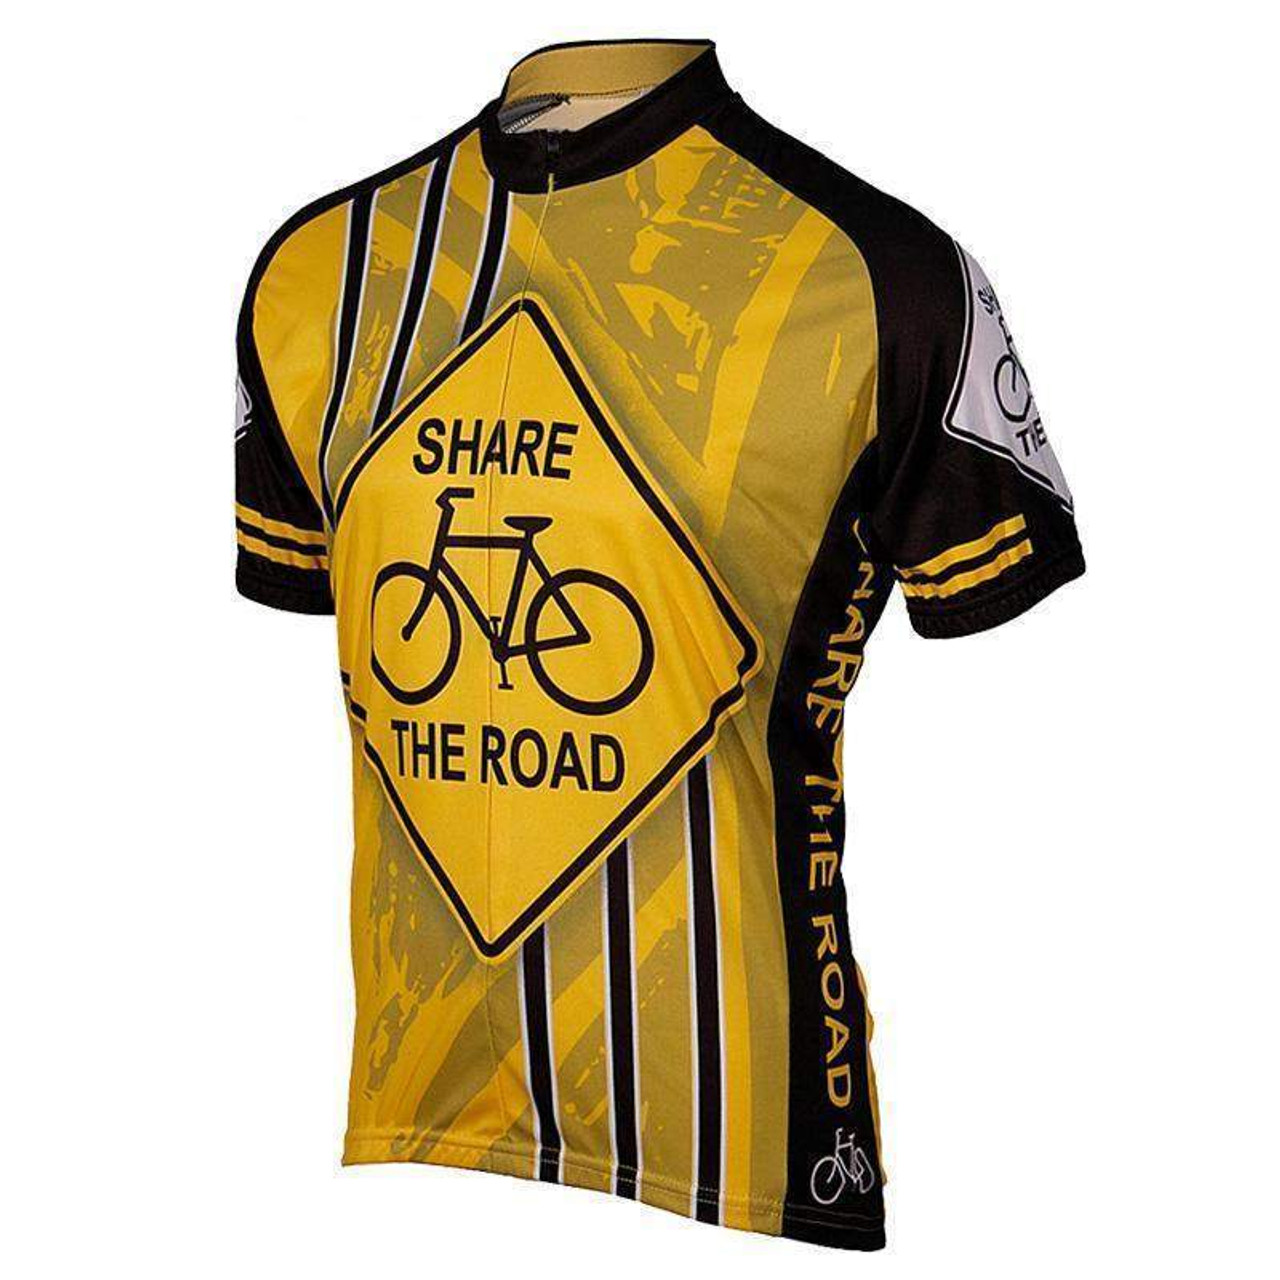 yellow cycling jersey for sale